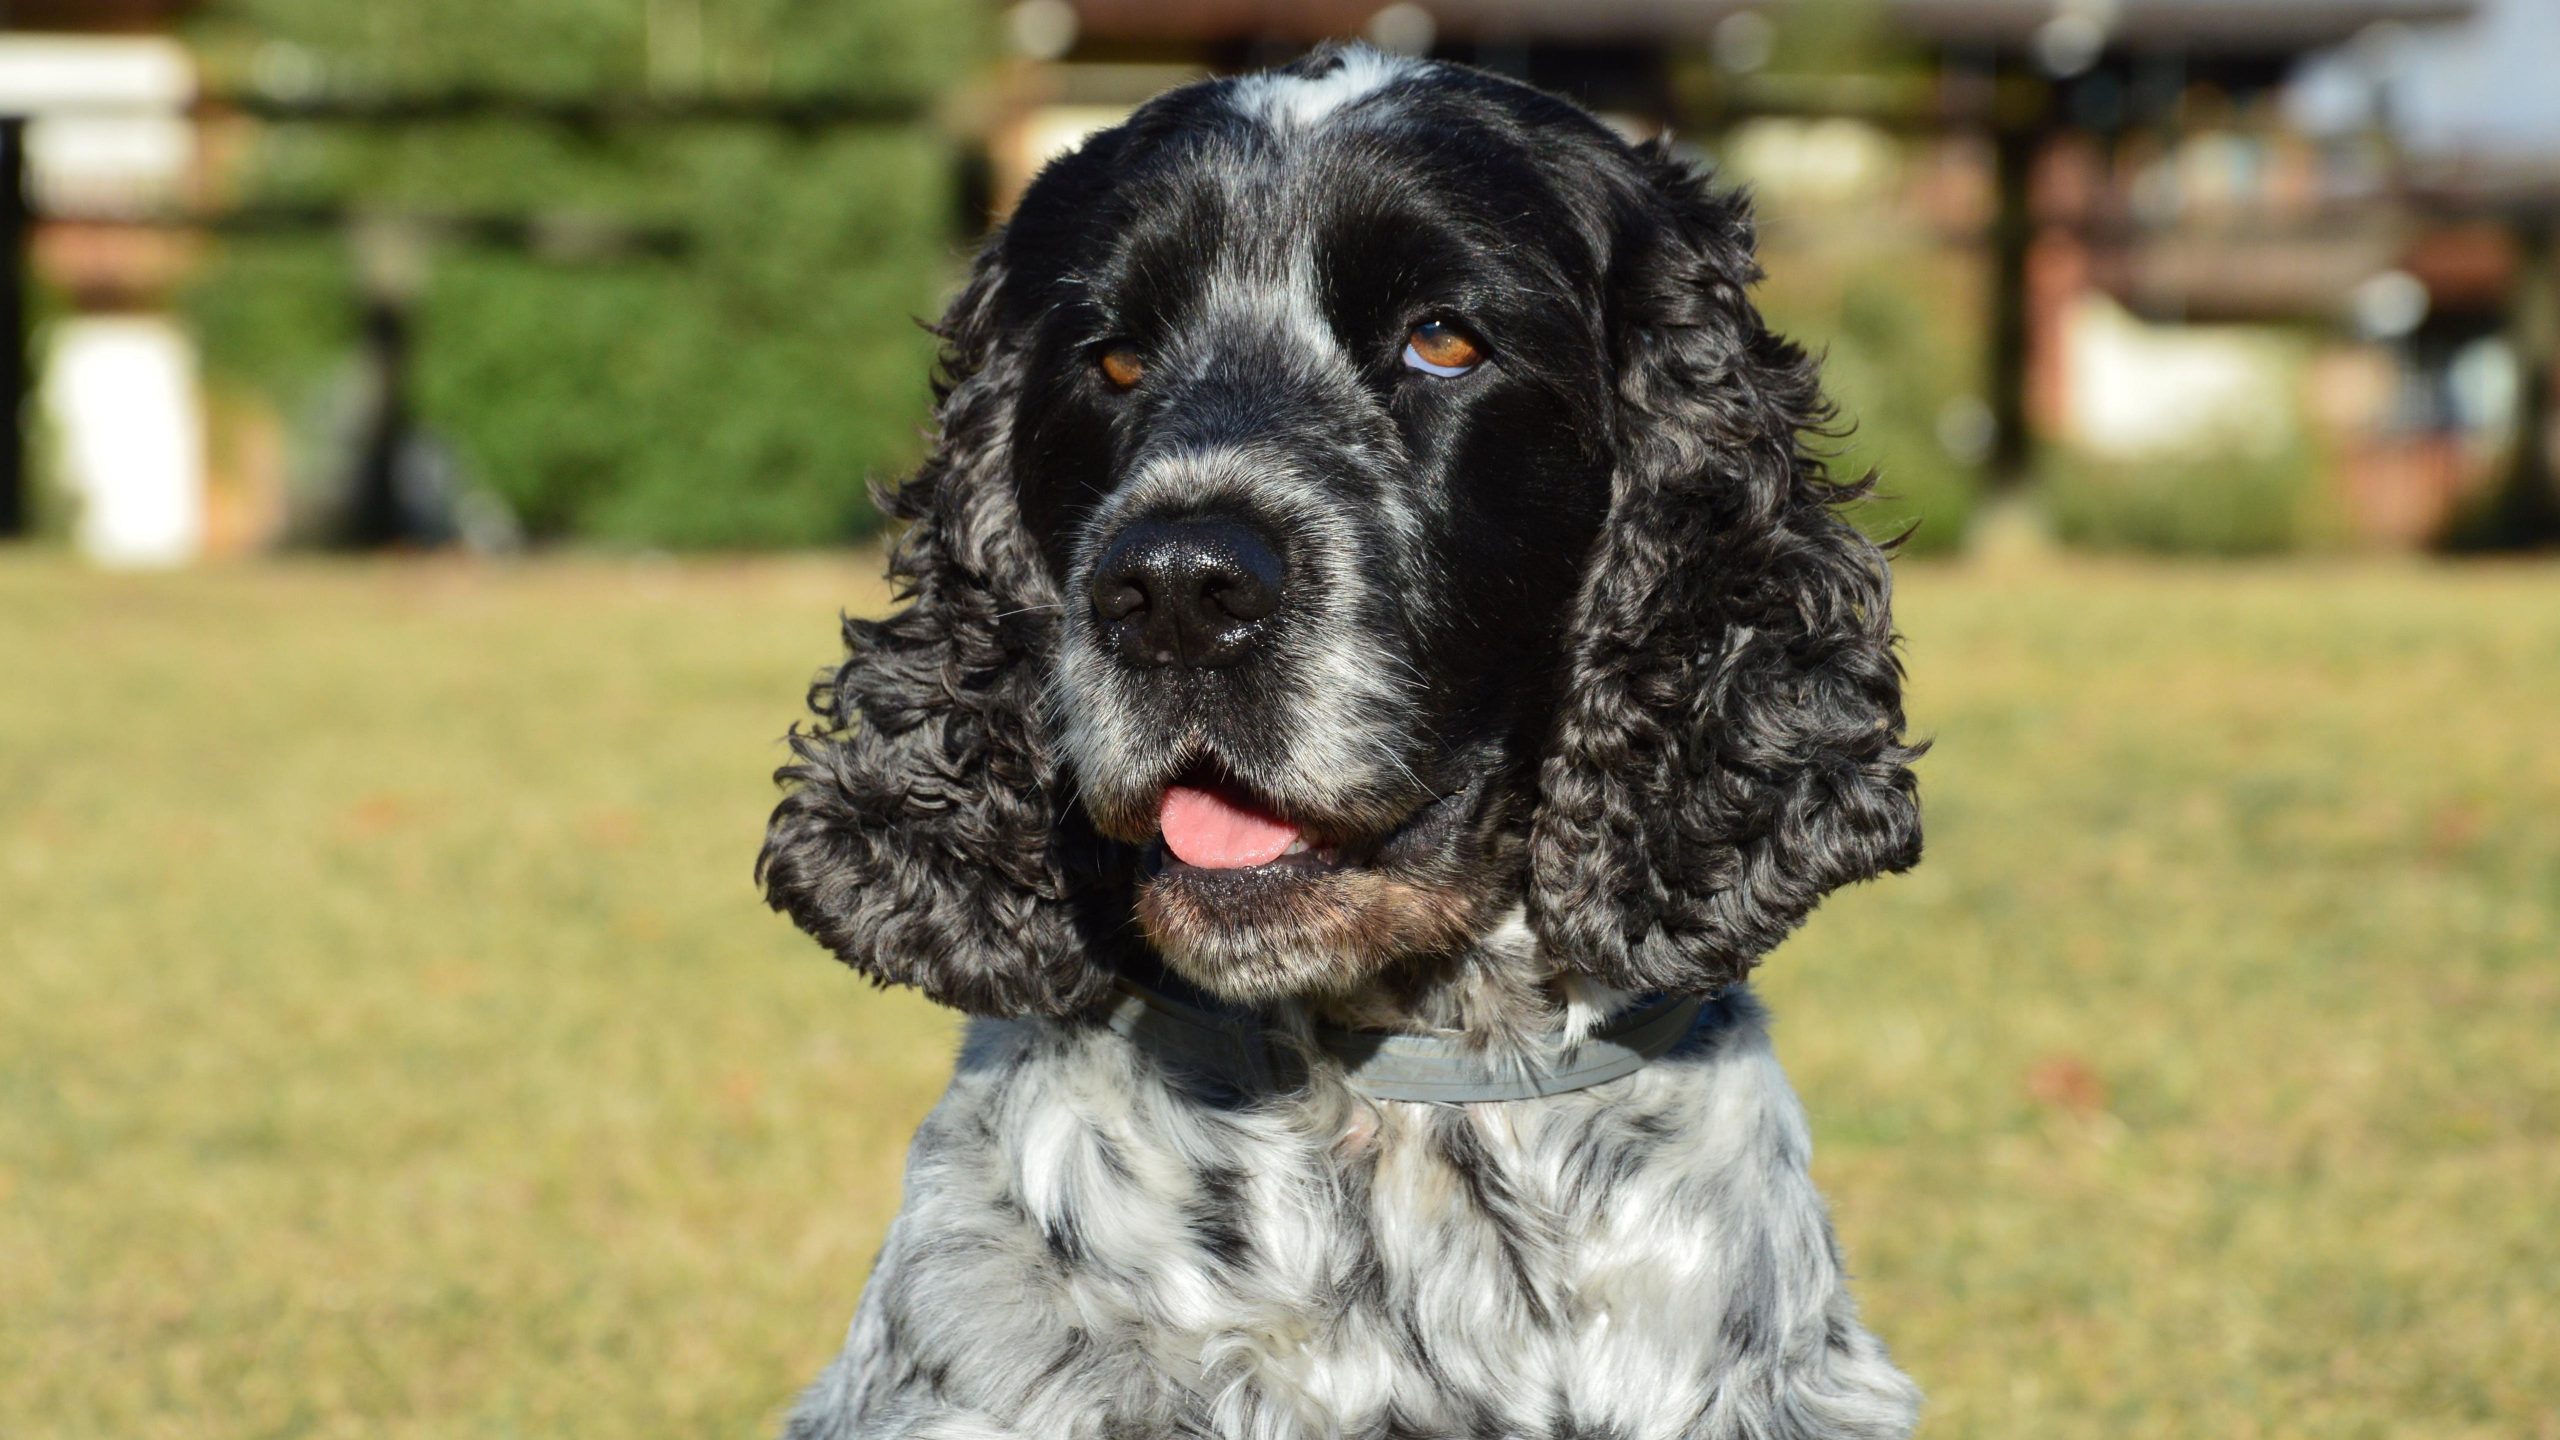 Are Cocker Spaniels The Worst Dog? – Food for Thought